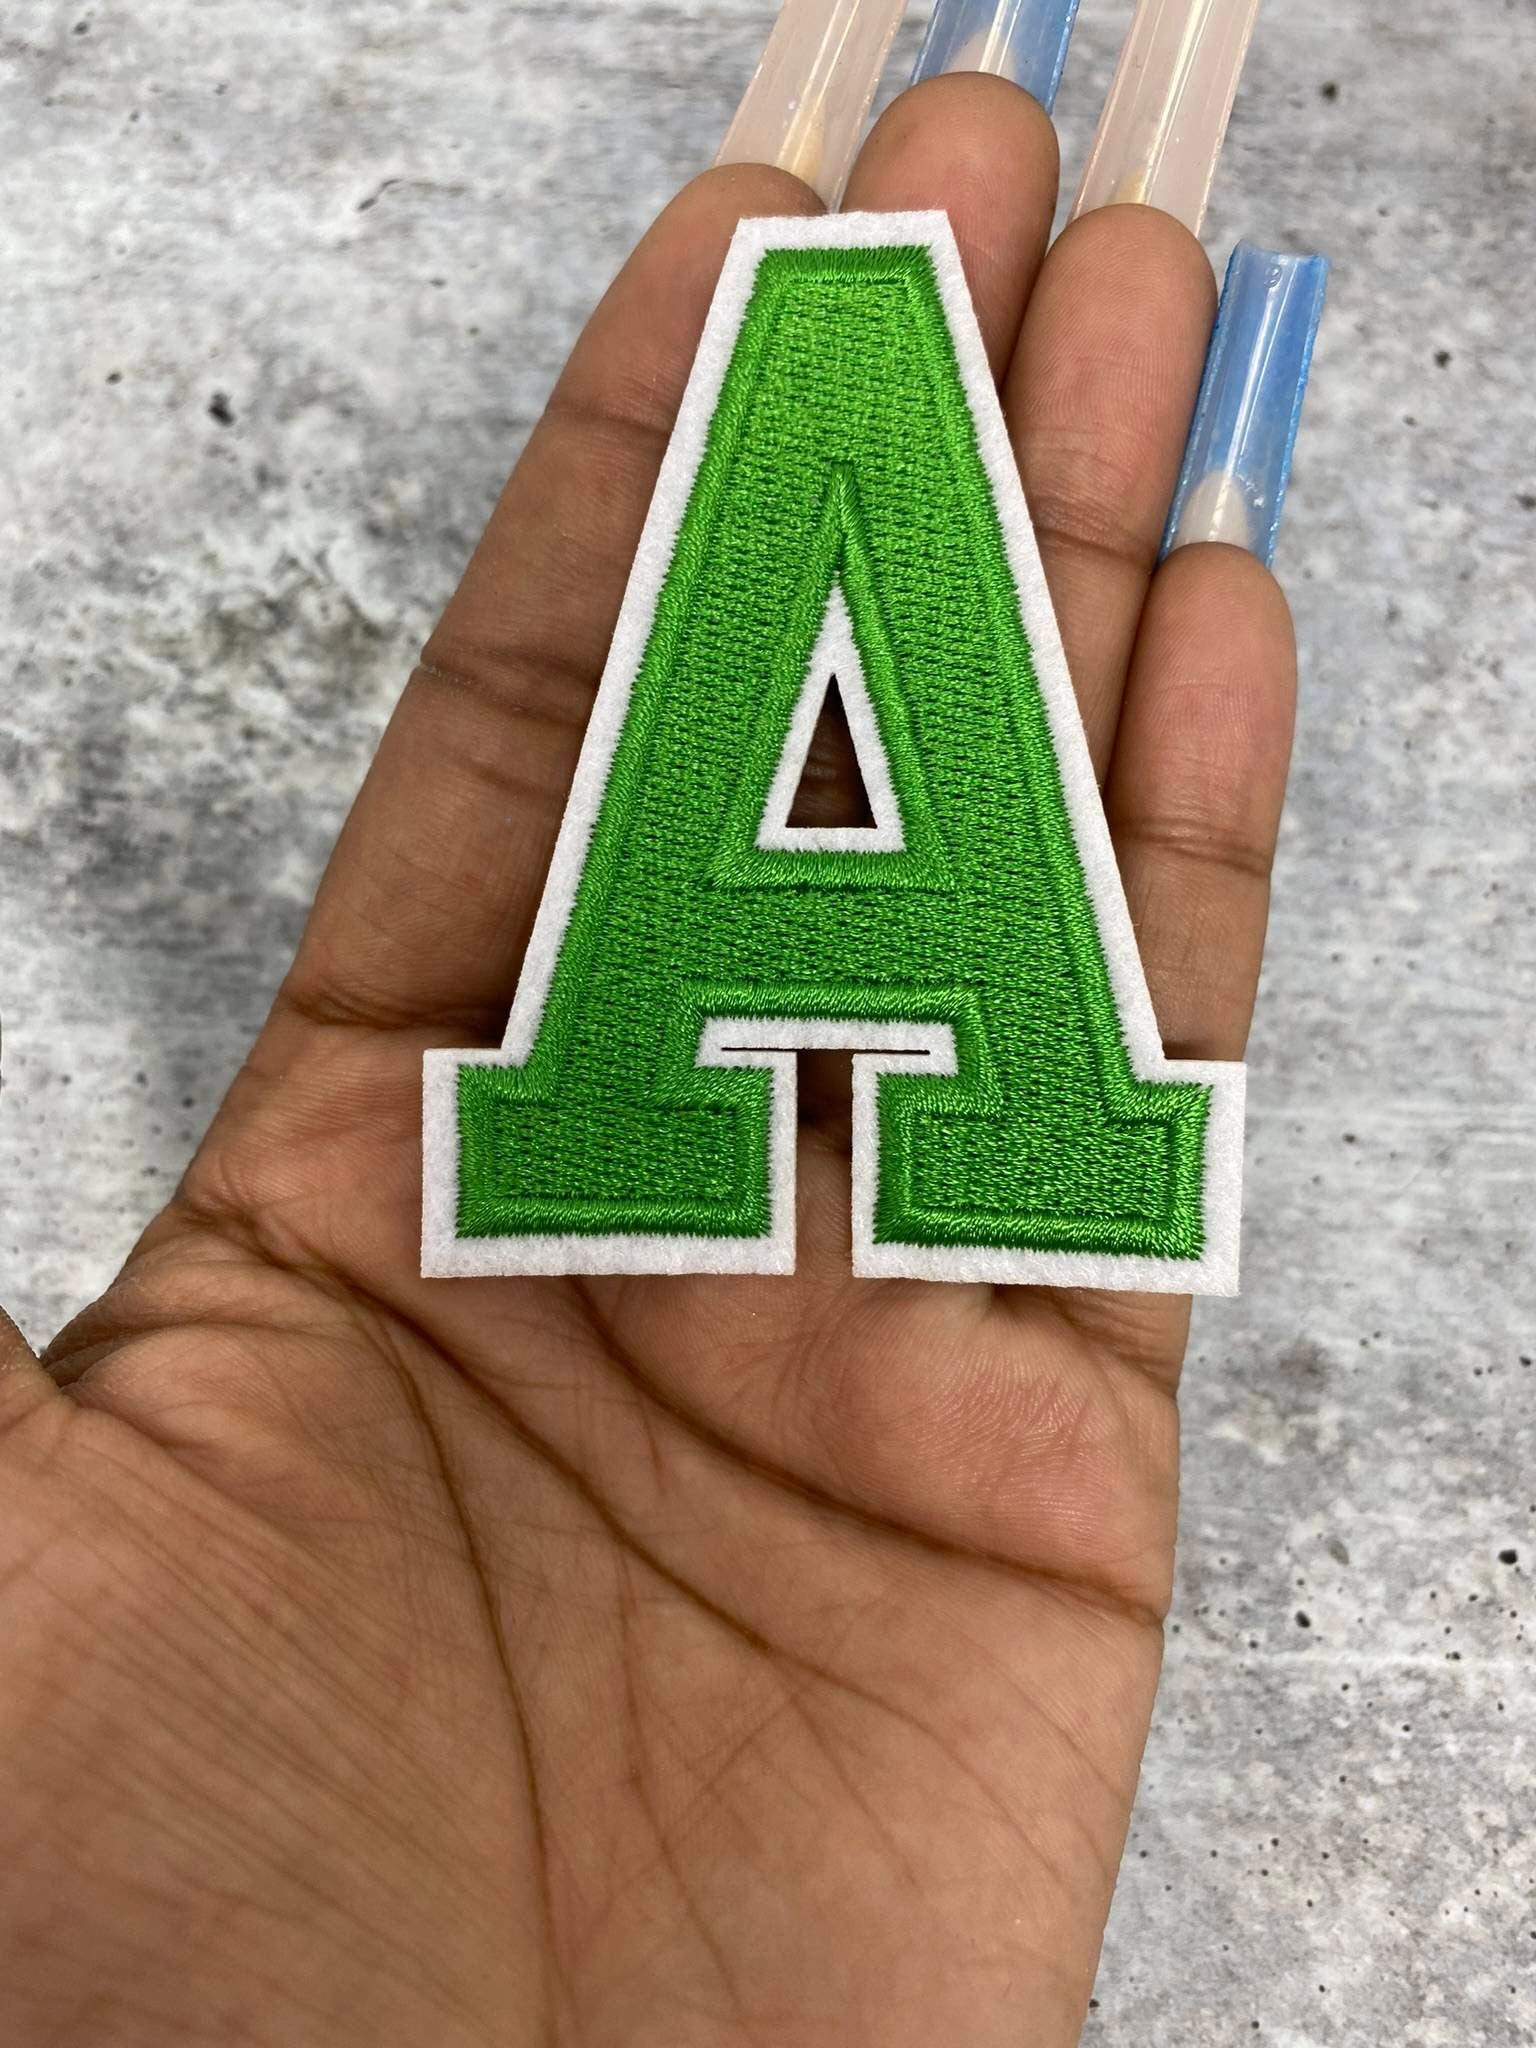 New,"GREEN/White" 3" Embroidered Letter w/Felt, Varsity Letter Patch, 1-pc, Iron-on Backing, Choose Your Letter, A-Z Letters, DIY Letters,